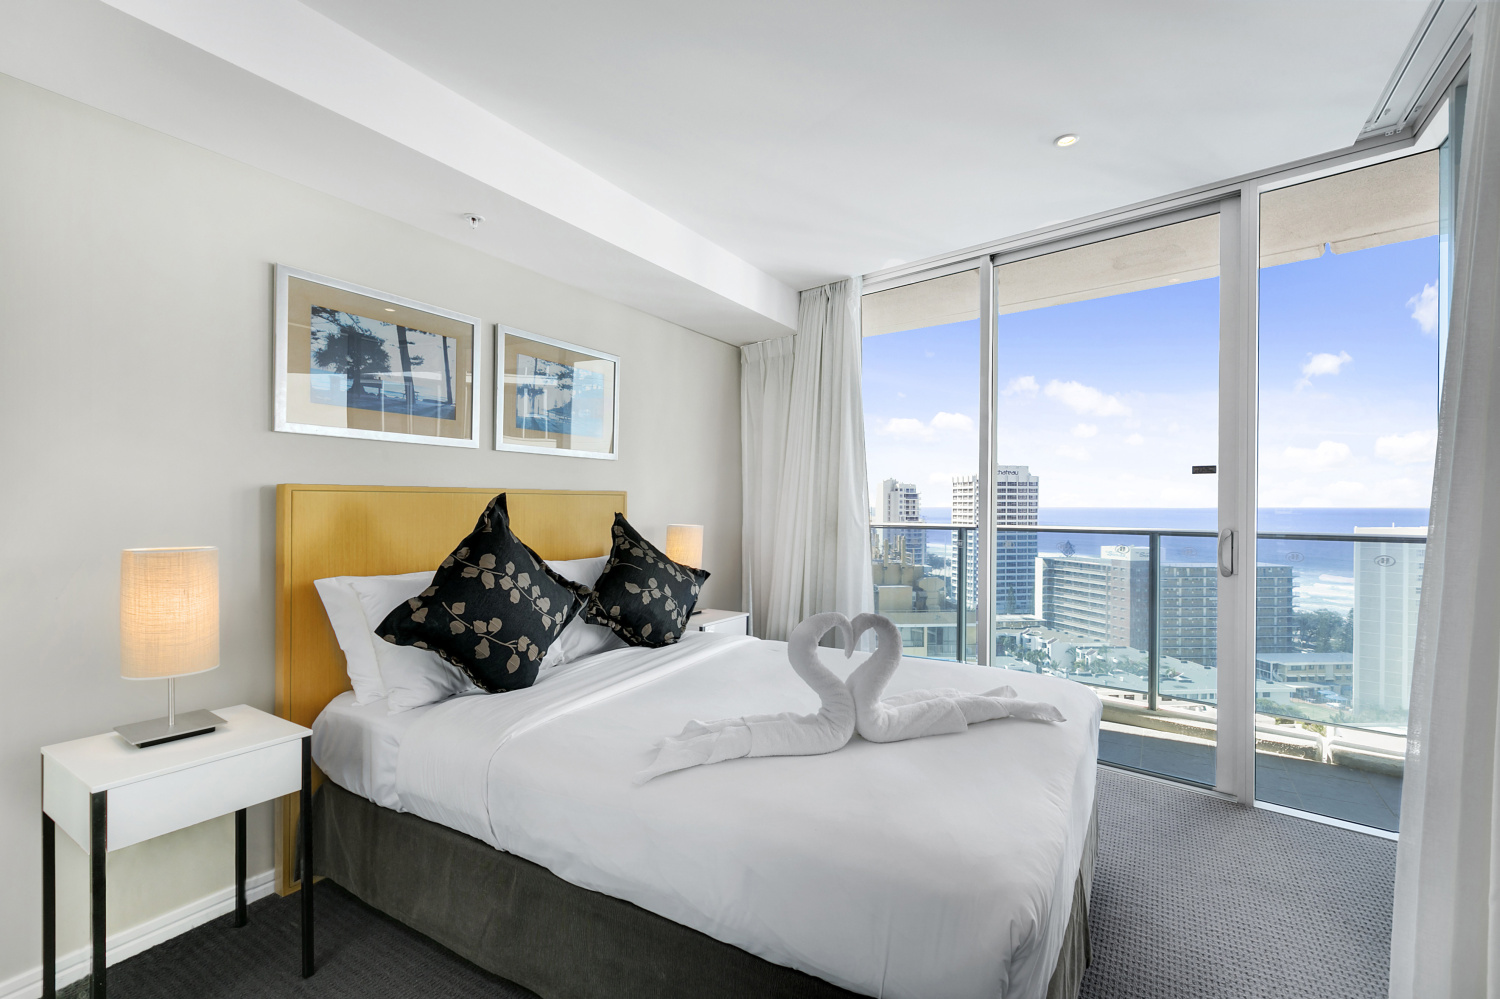 Second Bedroom with views over Surfers